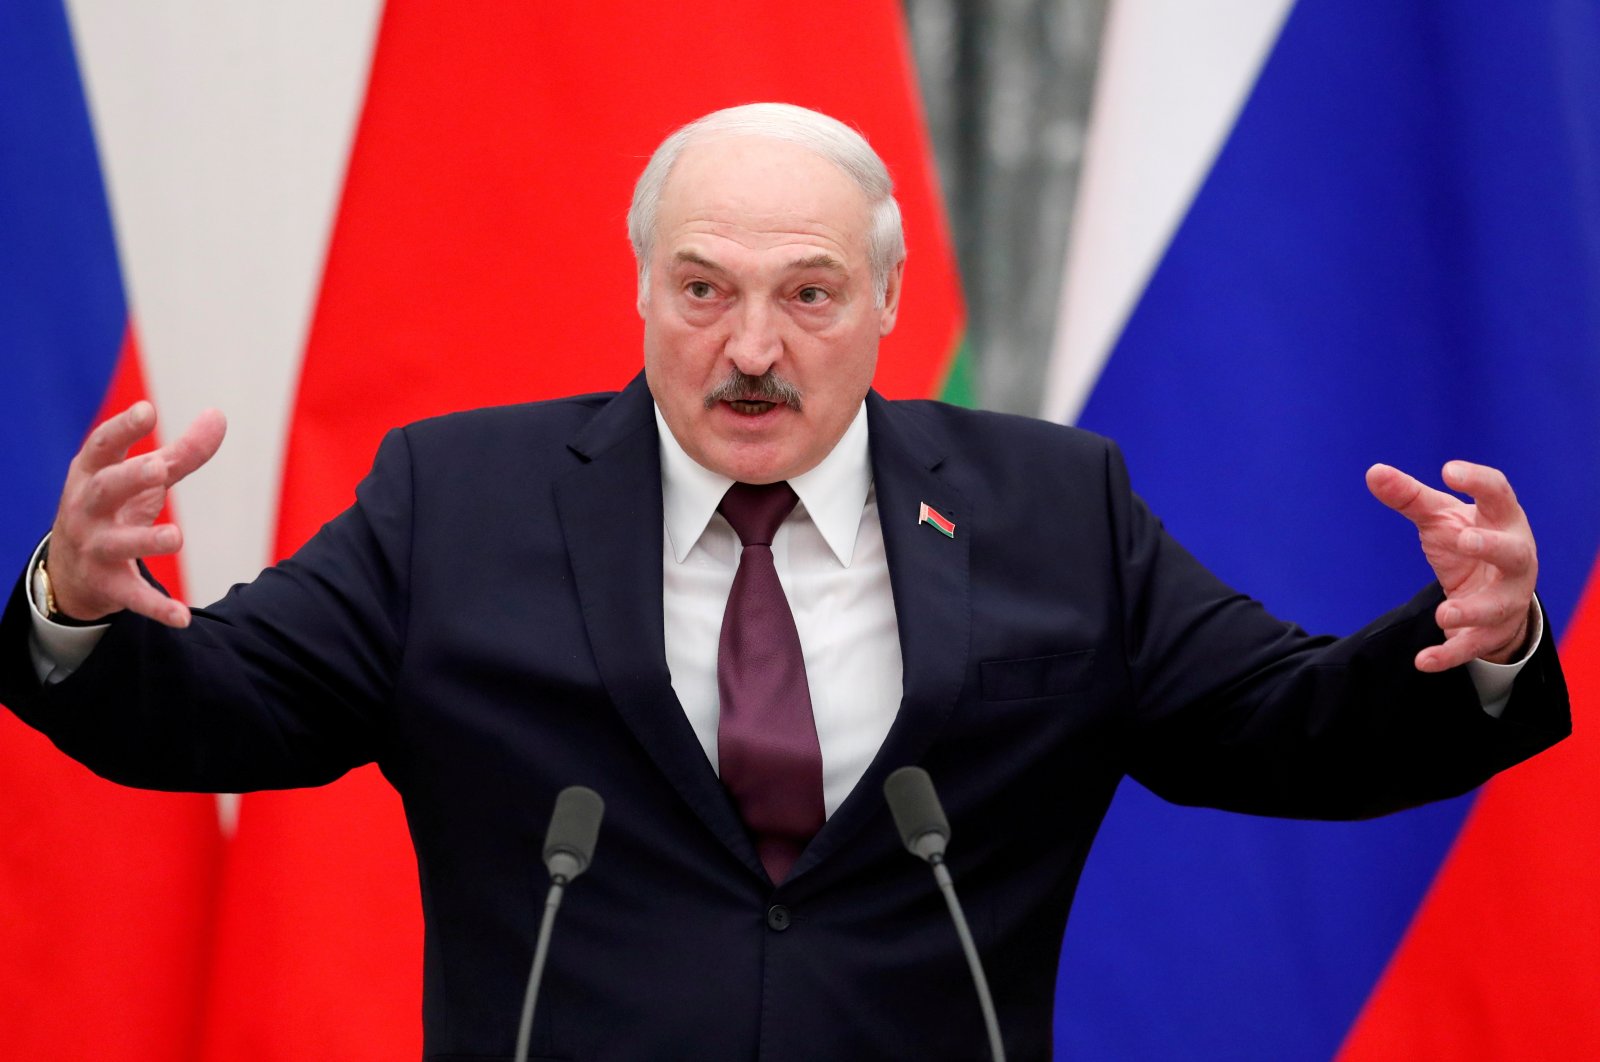 Belarusian President Alexander Lukashenko speaks during a news conference following talks with his Russian counterpart Vladimir Putin at the Kremlin in Moscow, Russia, Sept. 9, 2021. (Reuters Photo)